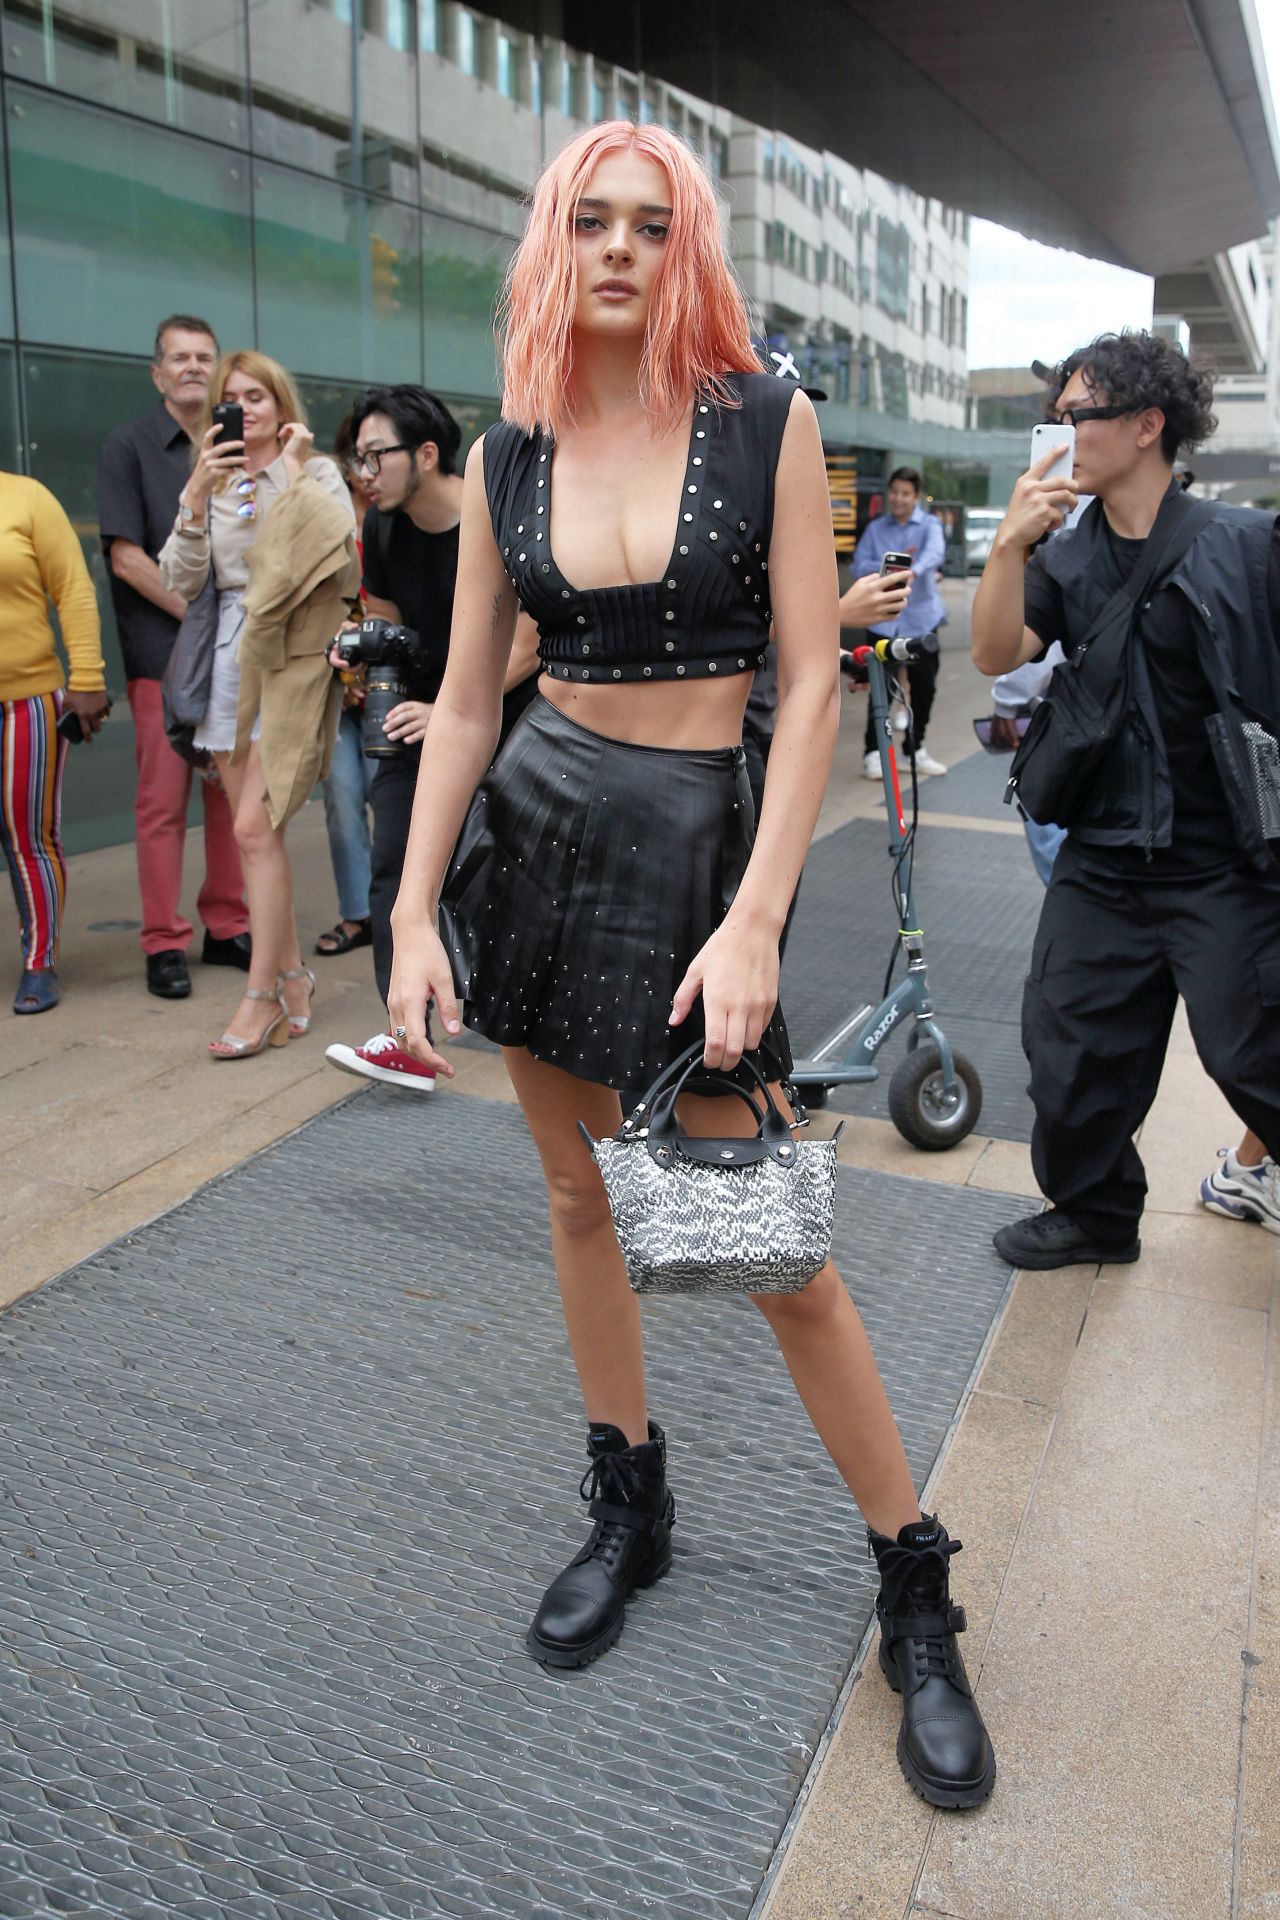 charlotte-lawrence-outside-longchamp-show-in-nyc-09-07-2019-8.jpg